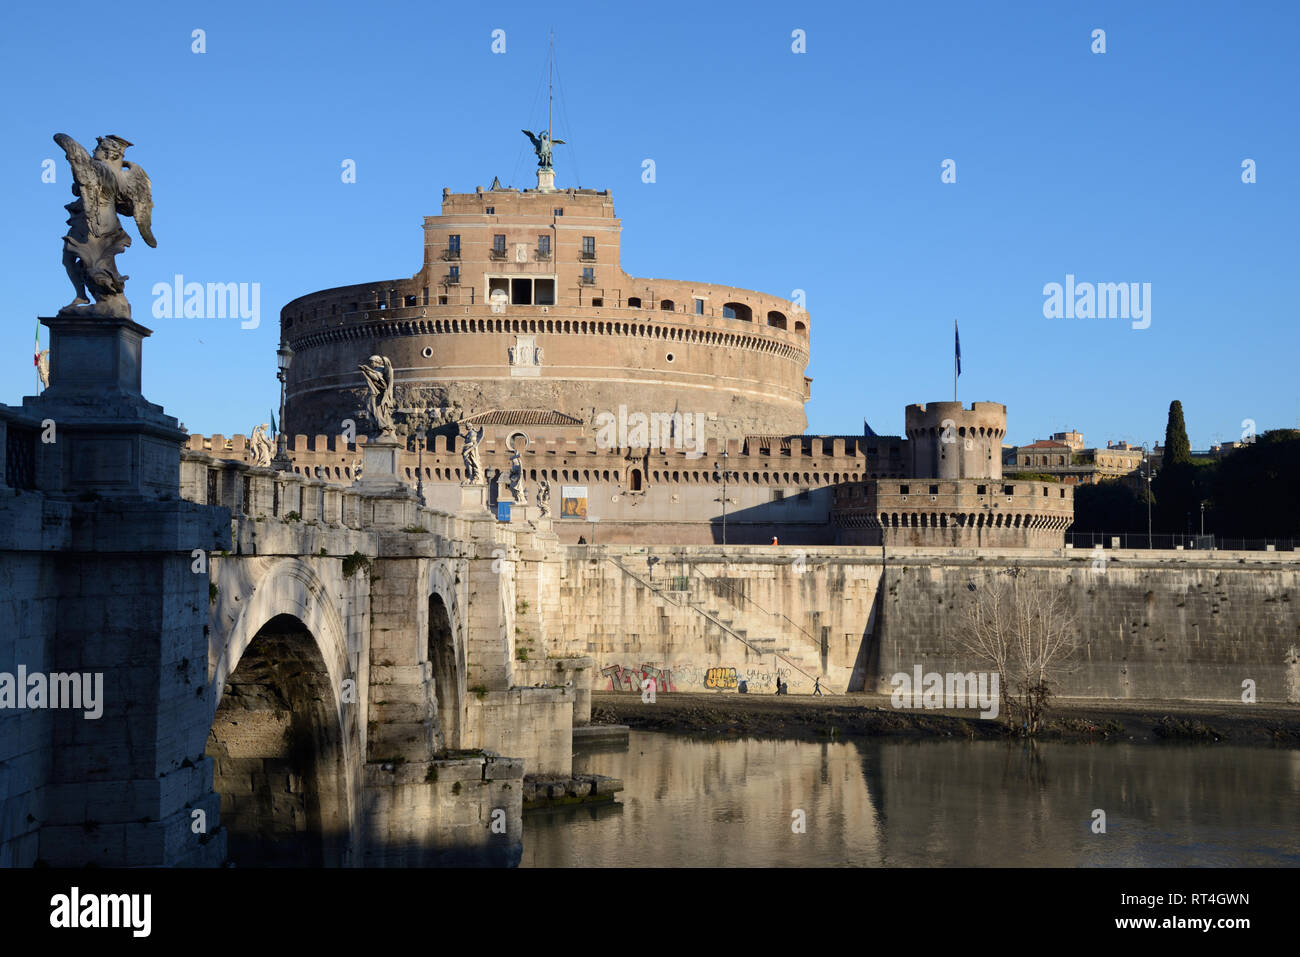 Mausoleum of Hadrian, Castel Sant'Angelo, Fort, Castle or Fortres and Ponte Sant'Angelo Bridge (134AD) over Tiber River Rome Italy Stock Photo